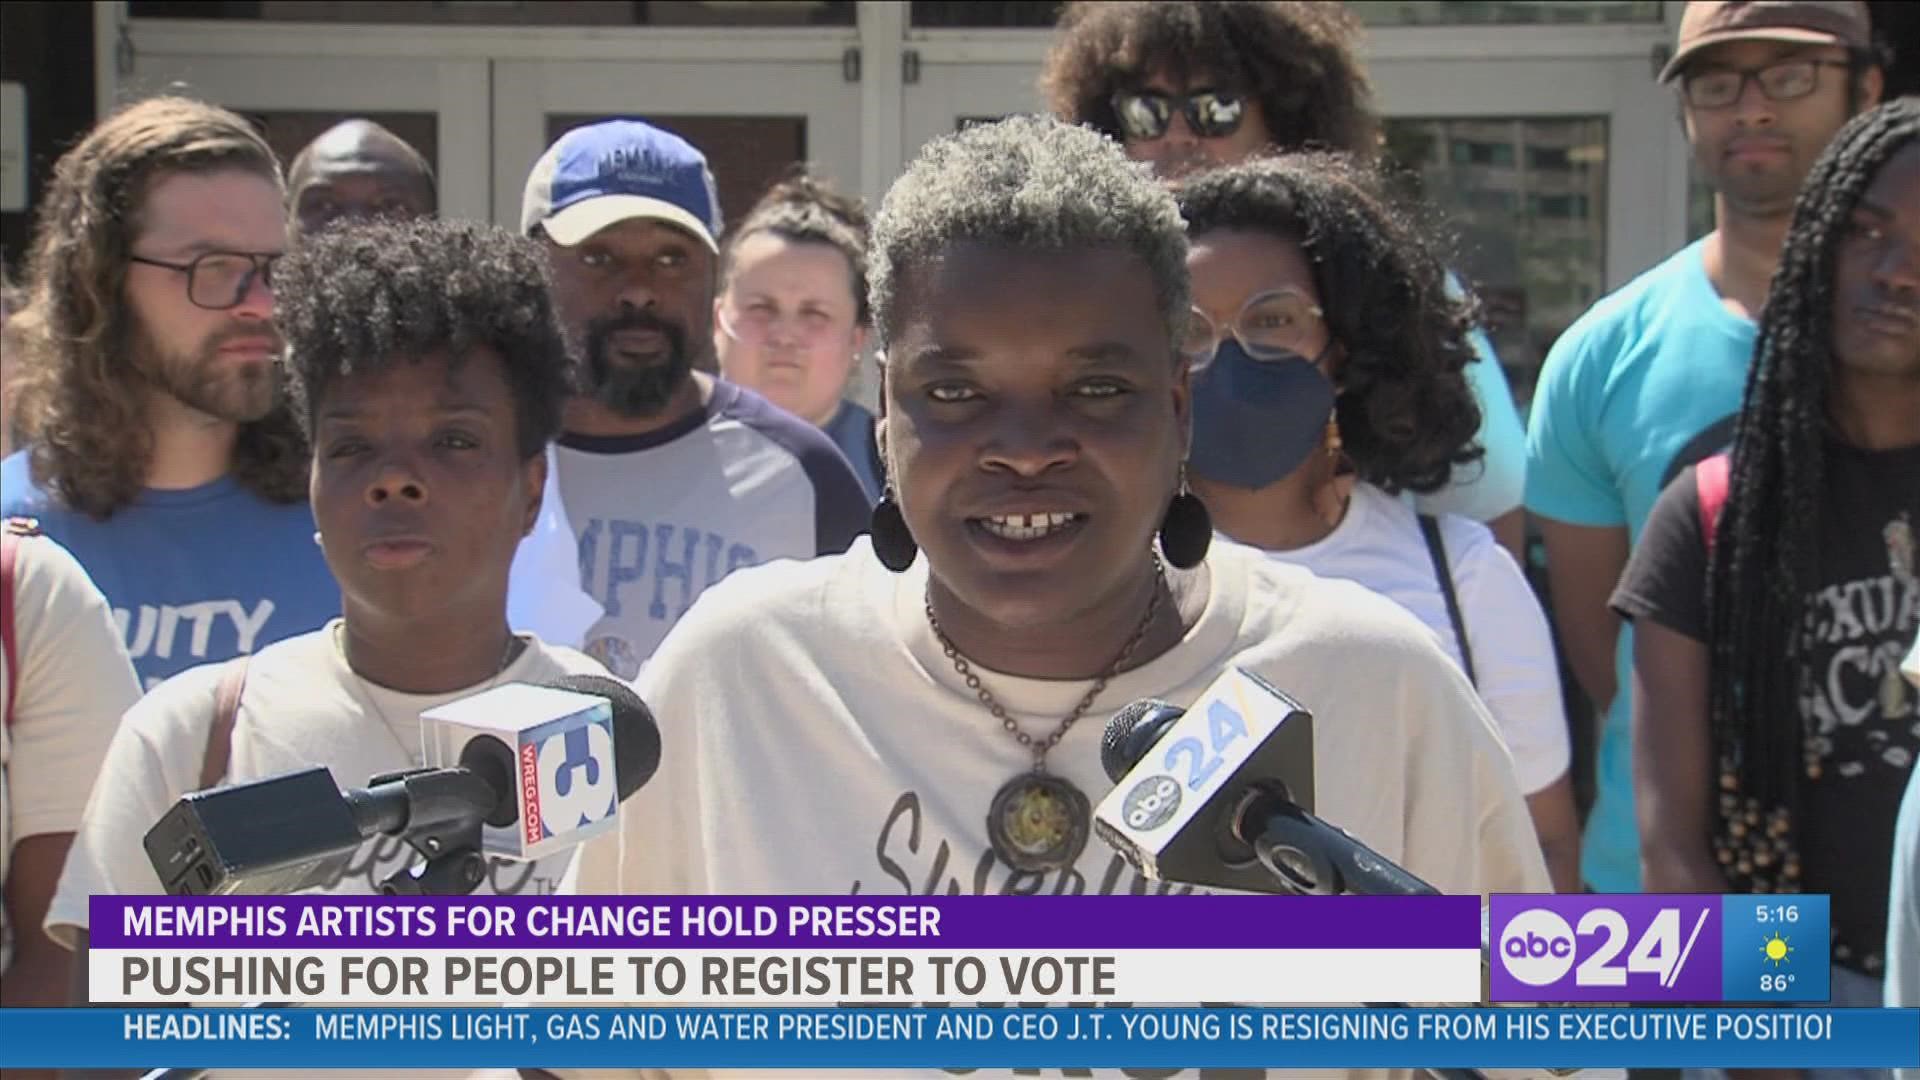 Memphis Artists for Change held a press conference at the Shelby County Election Commission's Office as part of a larger push to get more people registered to vote.